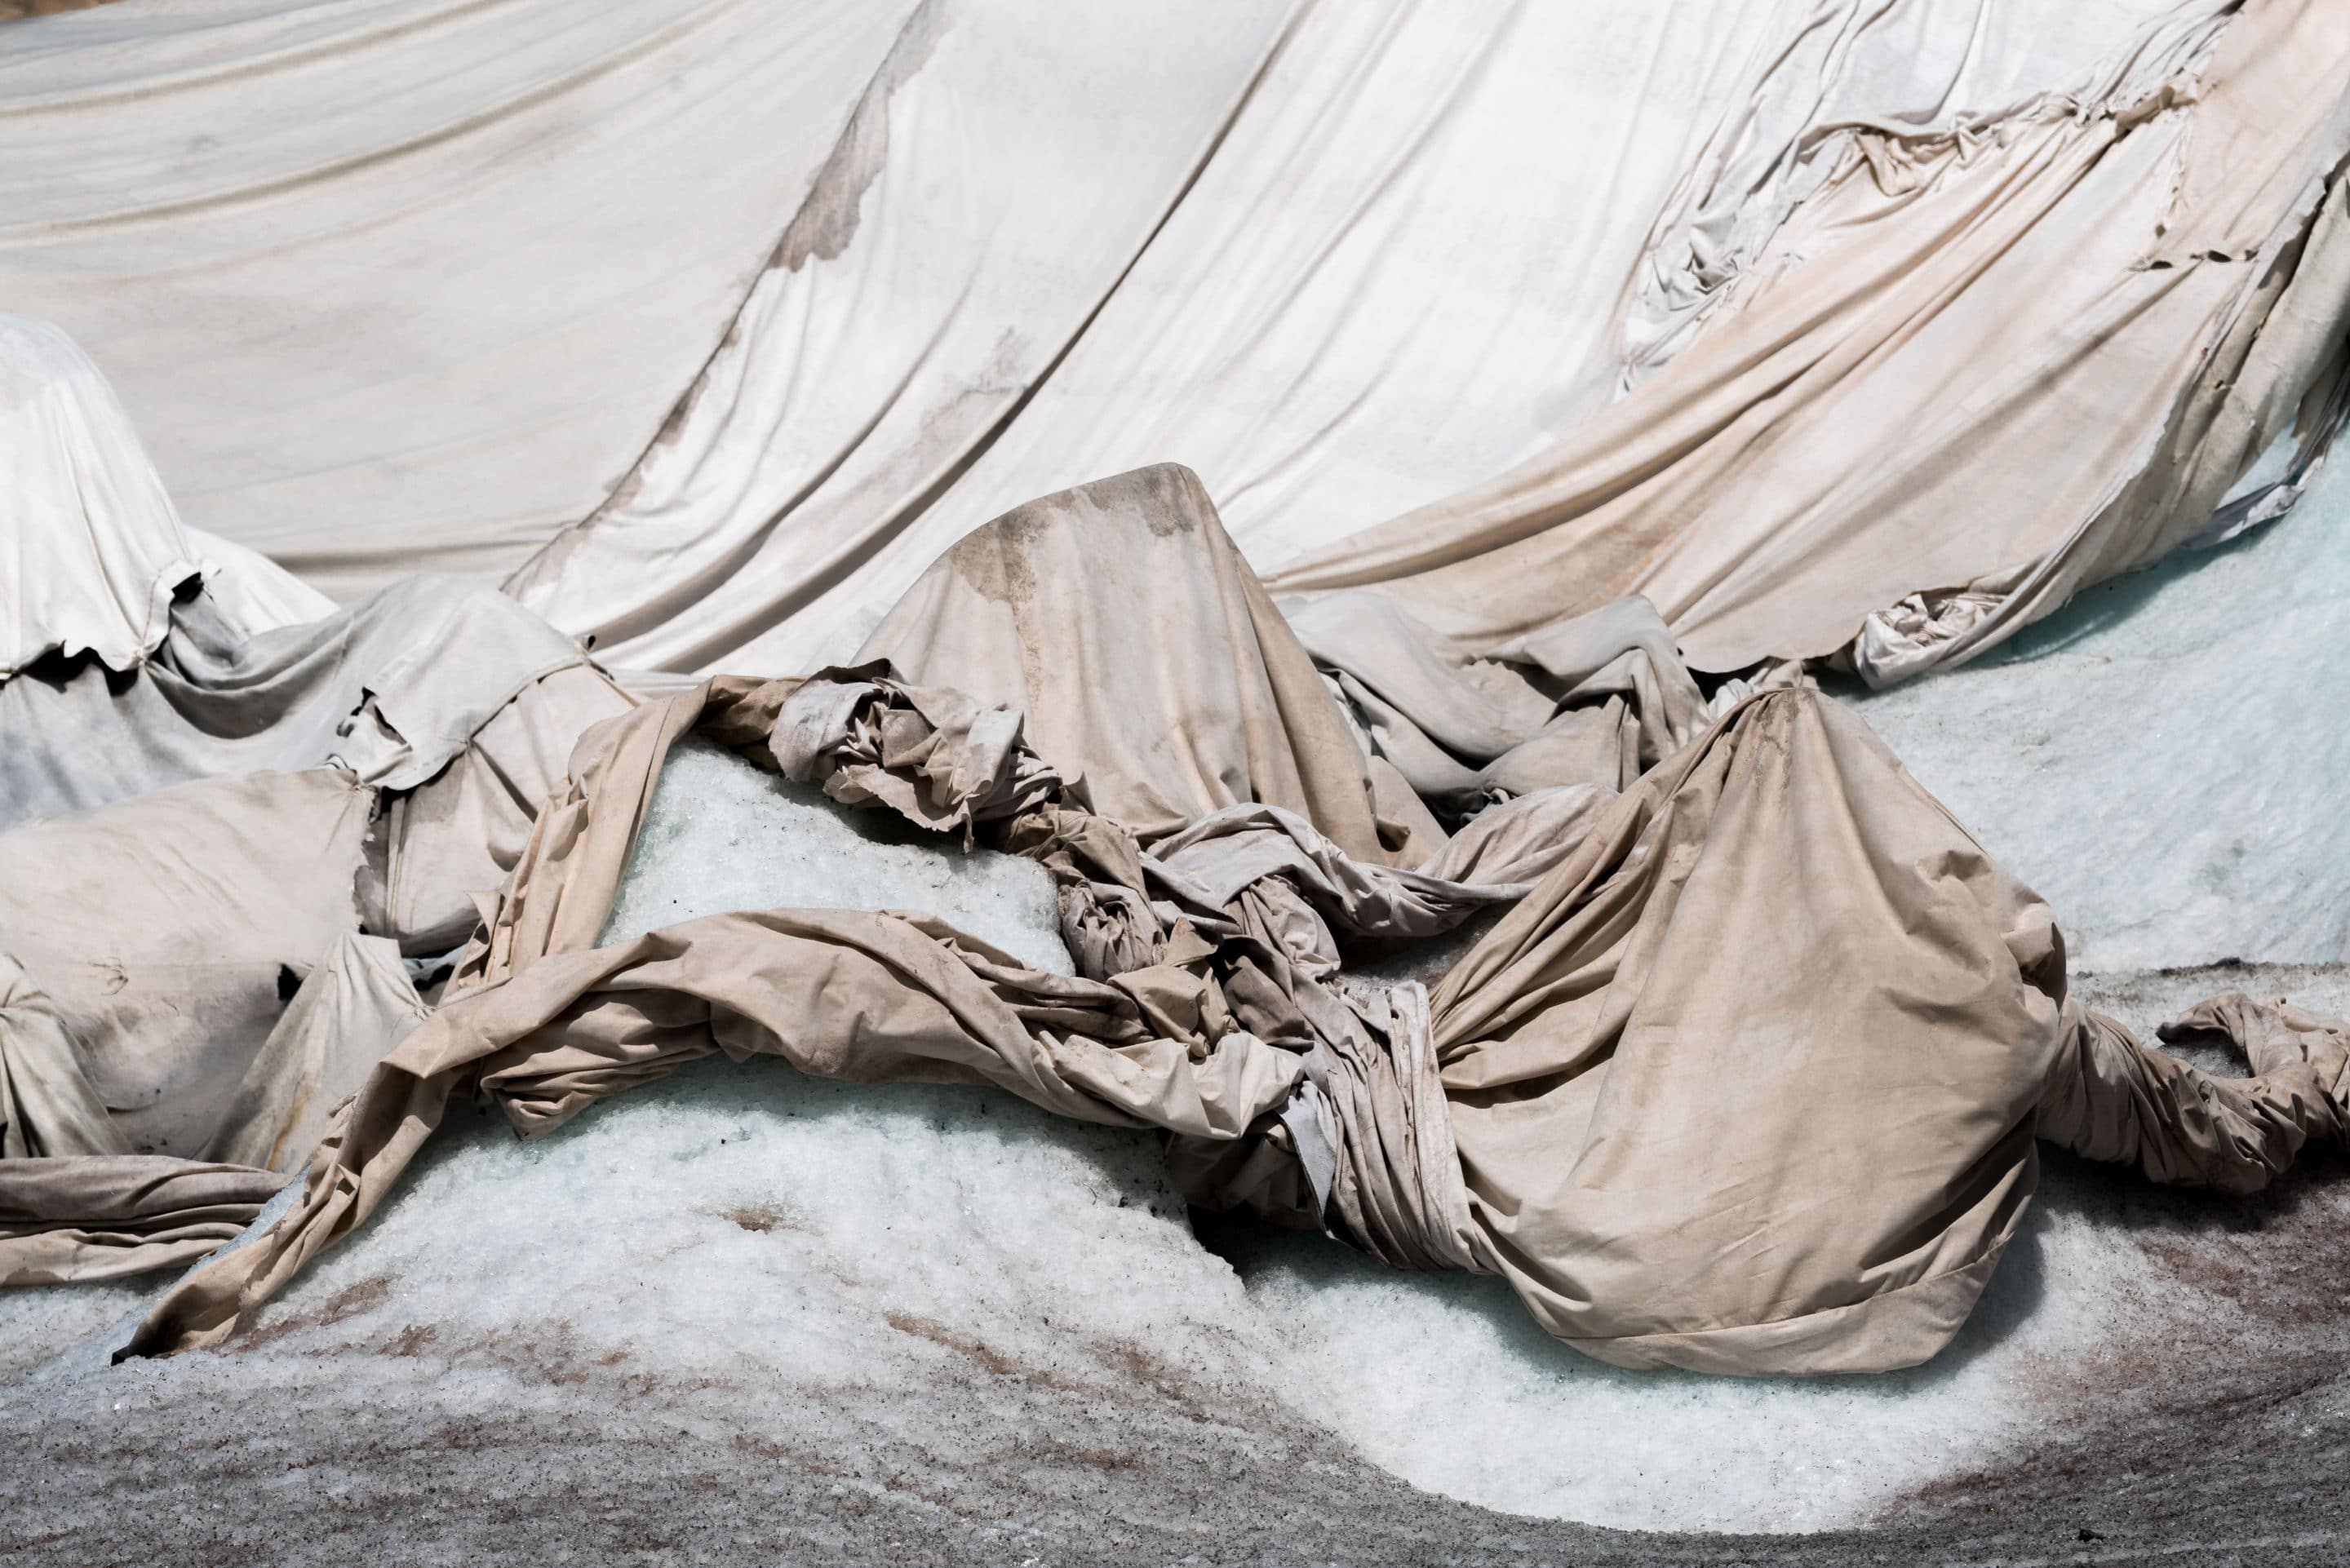 Fine art photographer Michael Schauer shoots the abstract landscape of Shrouds over a glacier in Switzerland to protect it from the sun in summer. This is but one example for how humans are finding solutions for dealing with man made climate change